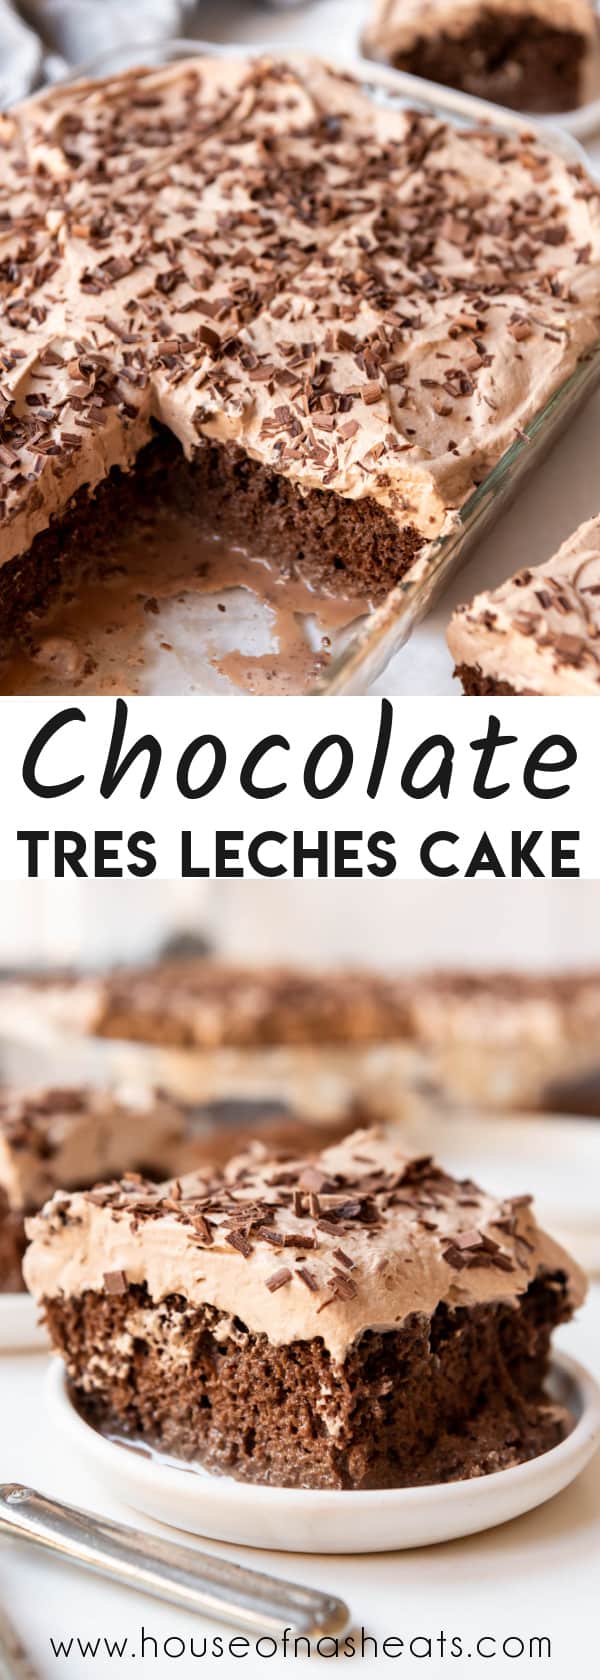 A collage of images of chocolate tres leches cake with text images.